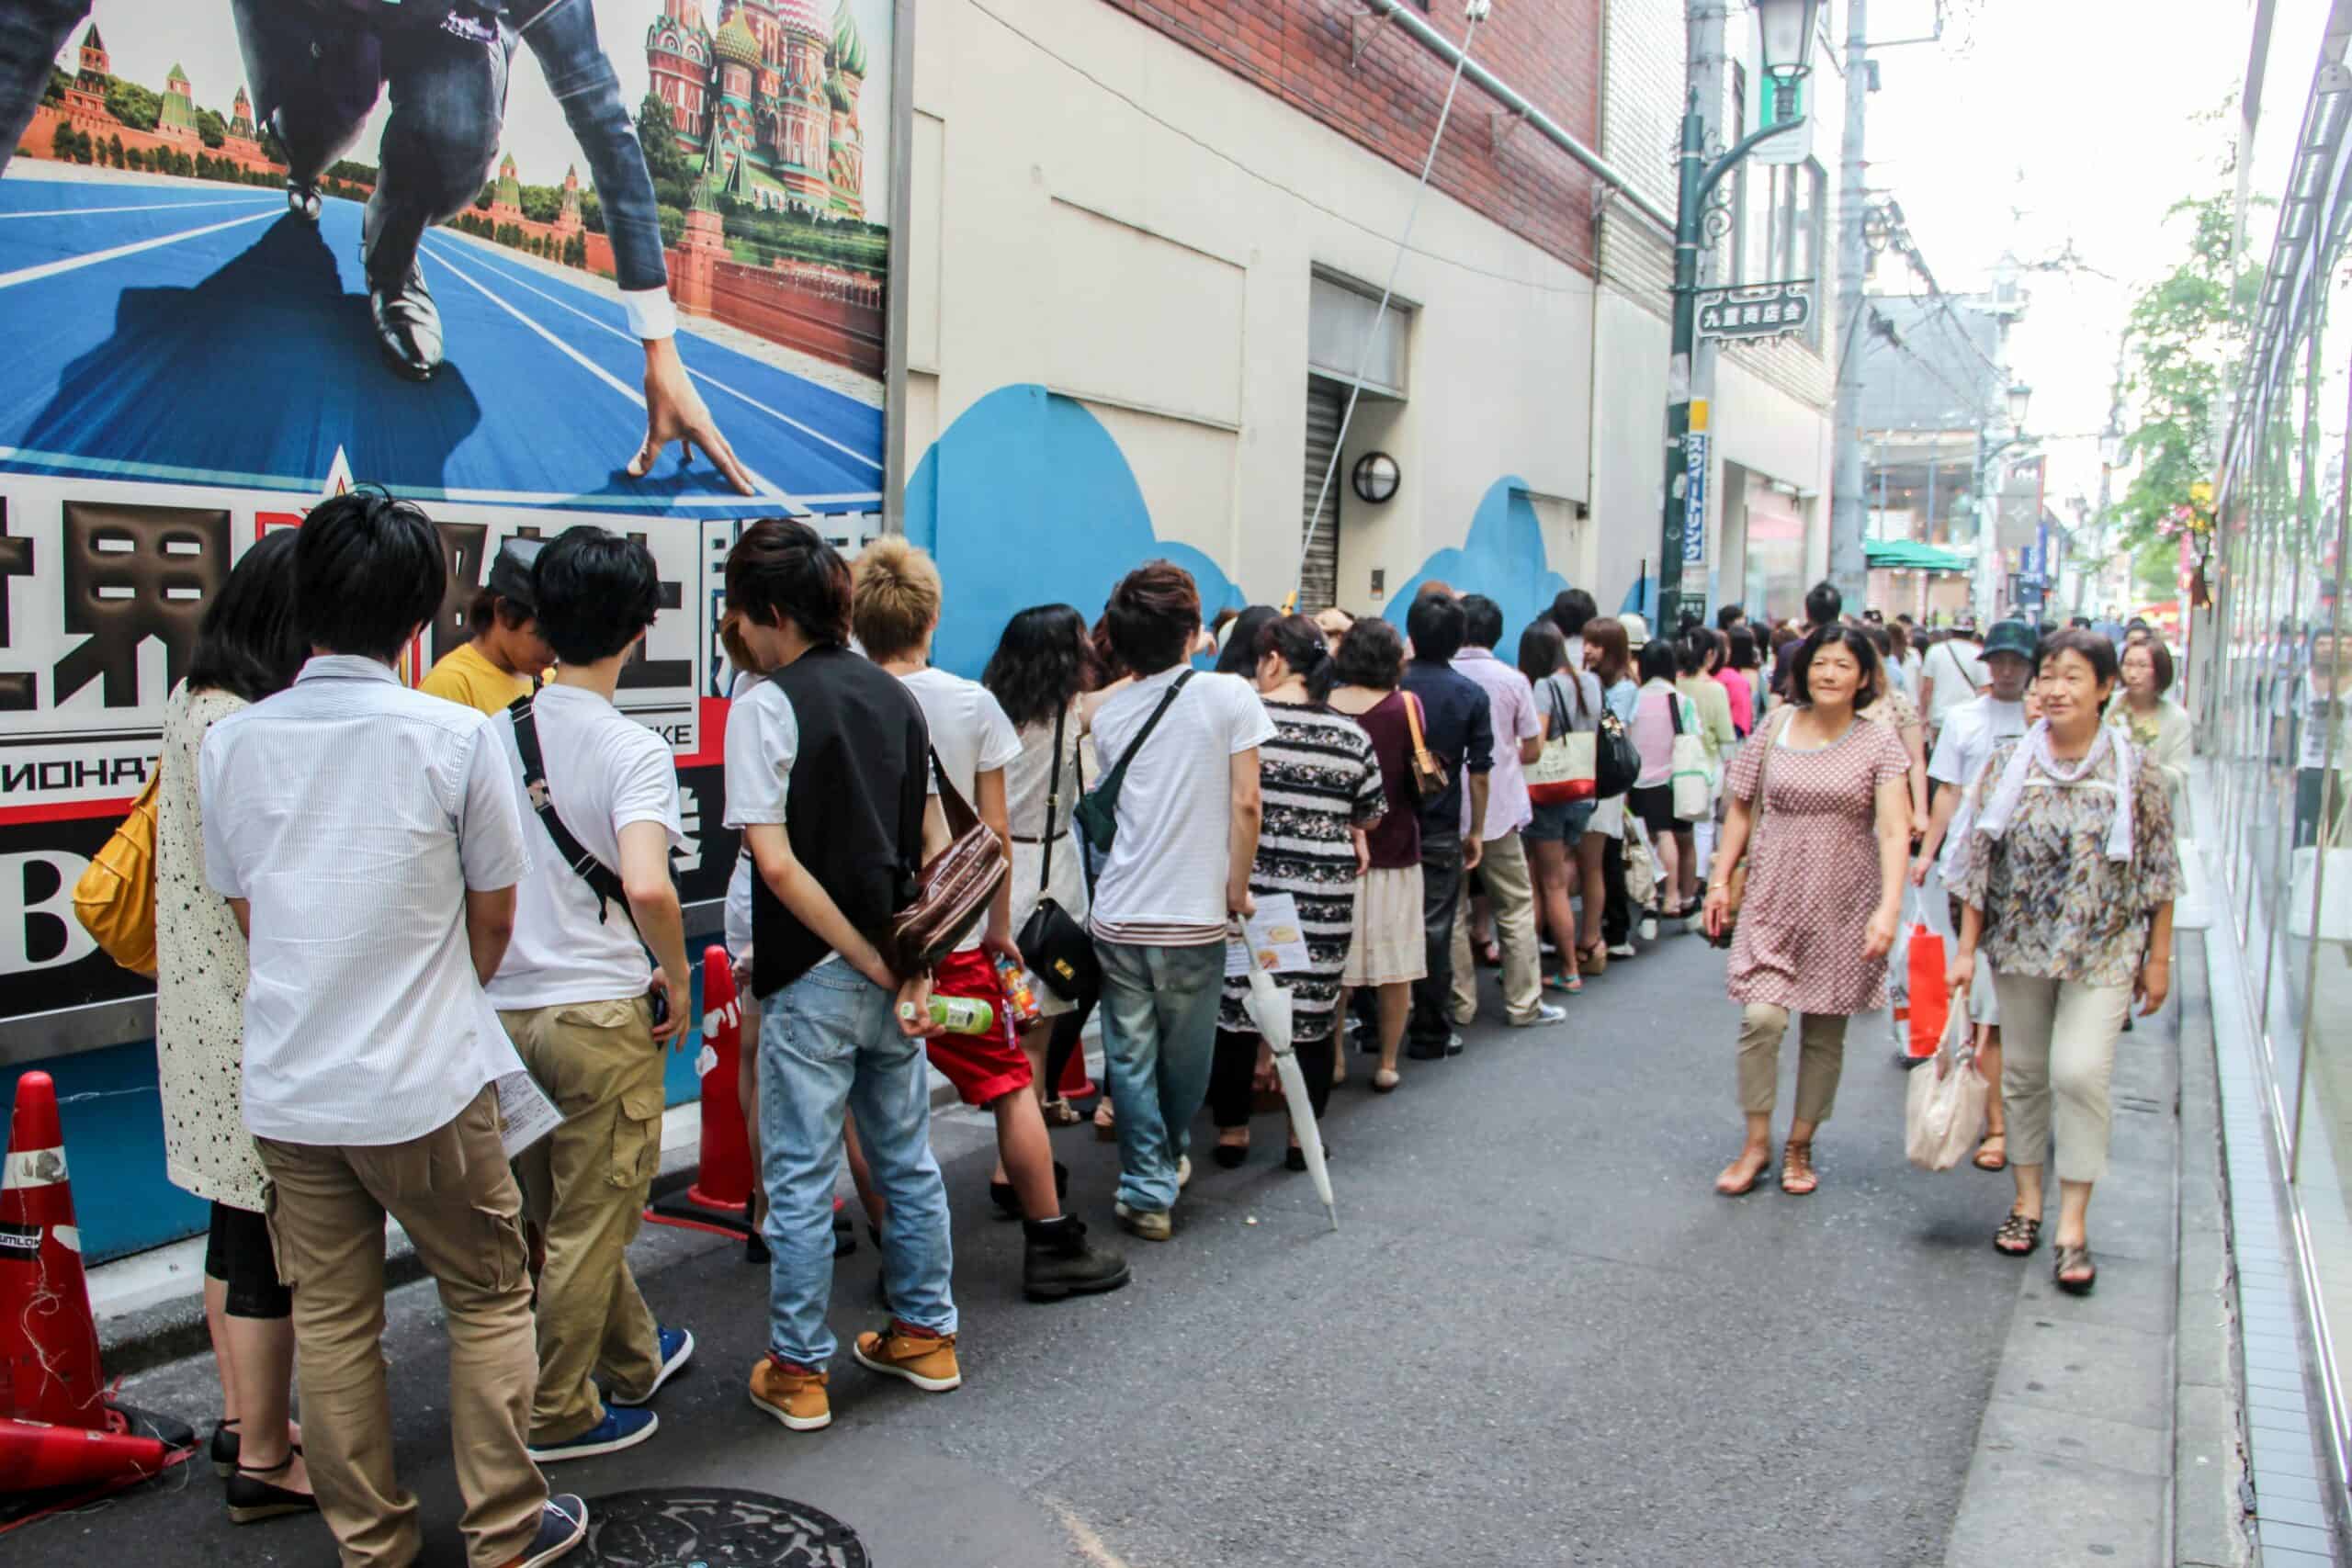 Two Japanese women walk past a long and orderly line of young people outside a building in Tokyo.